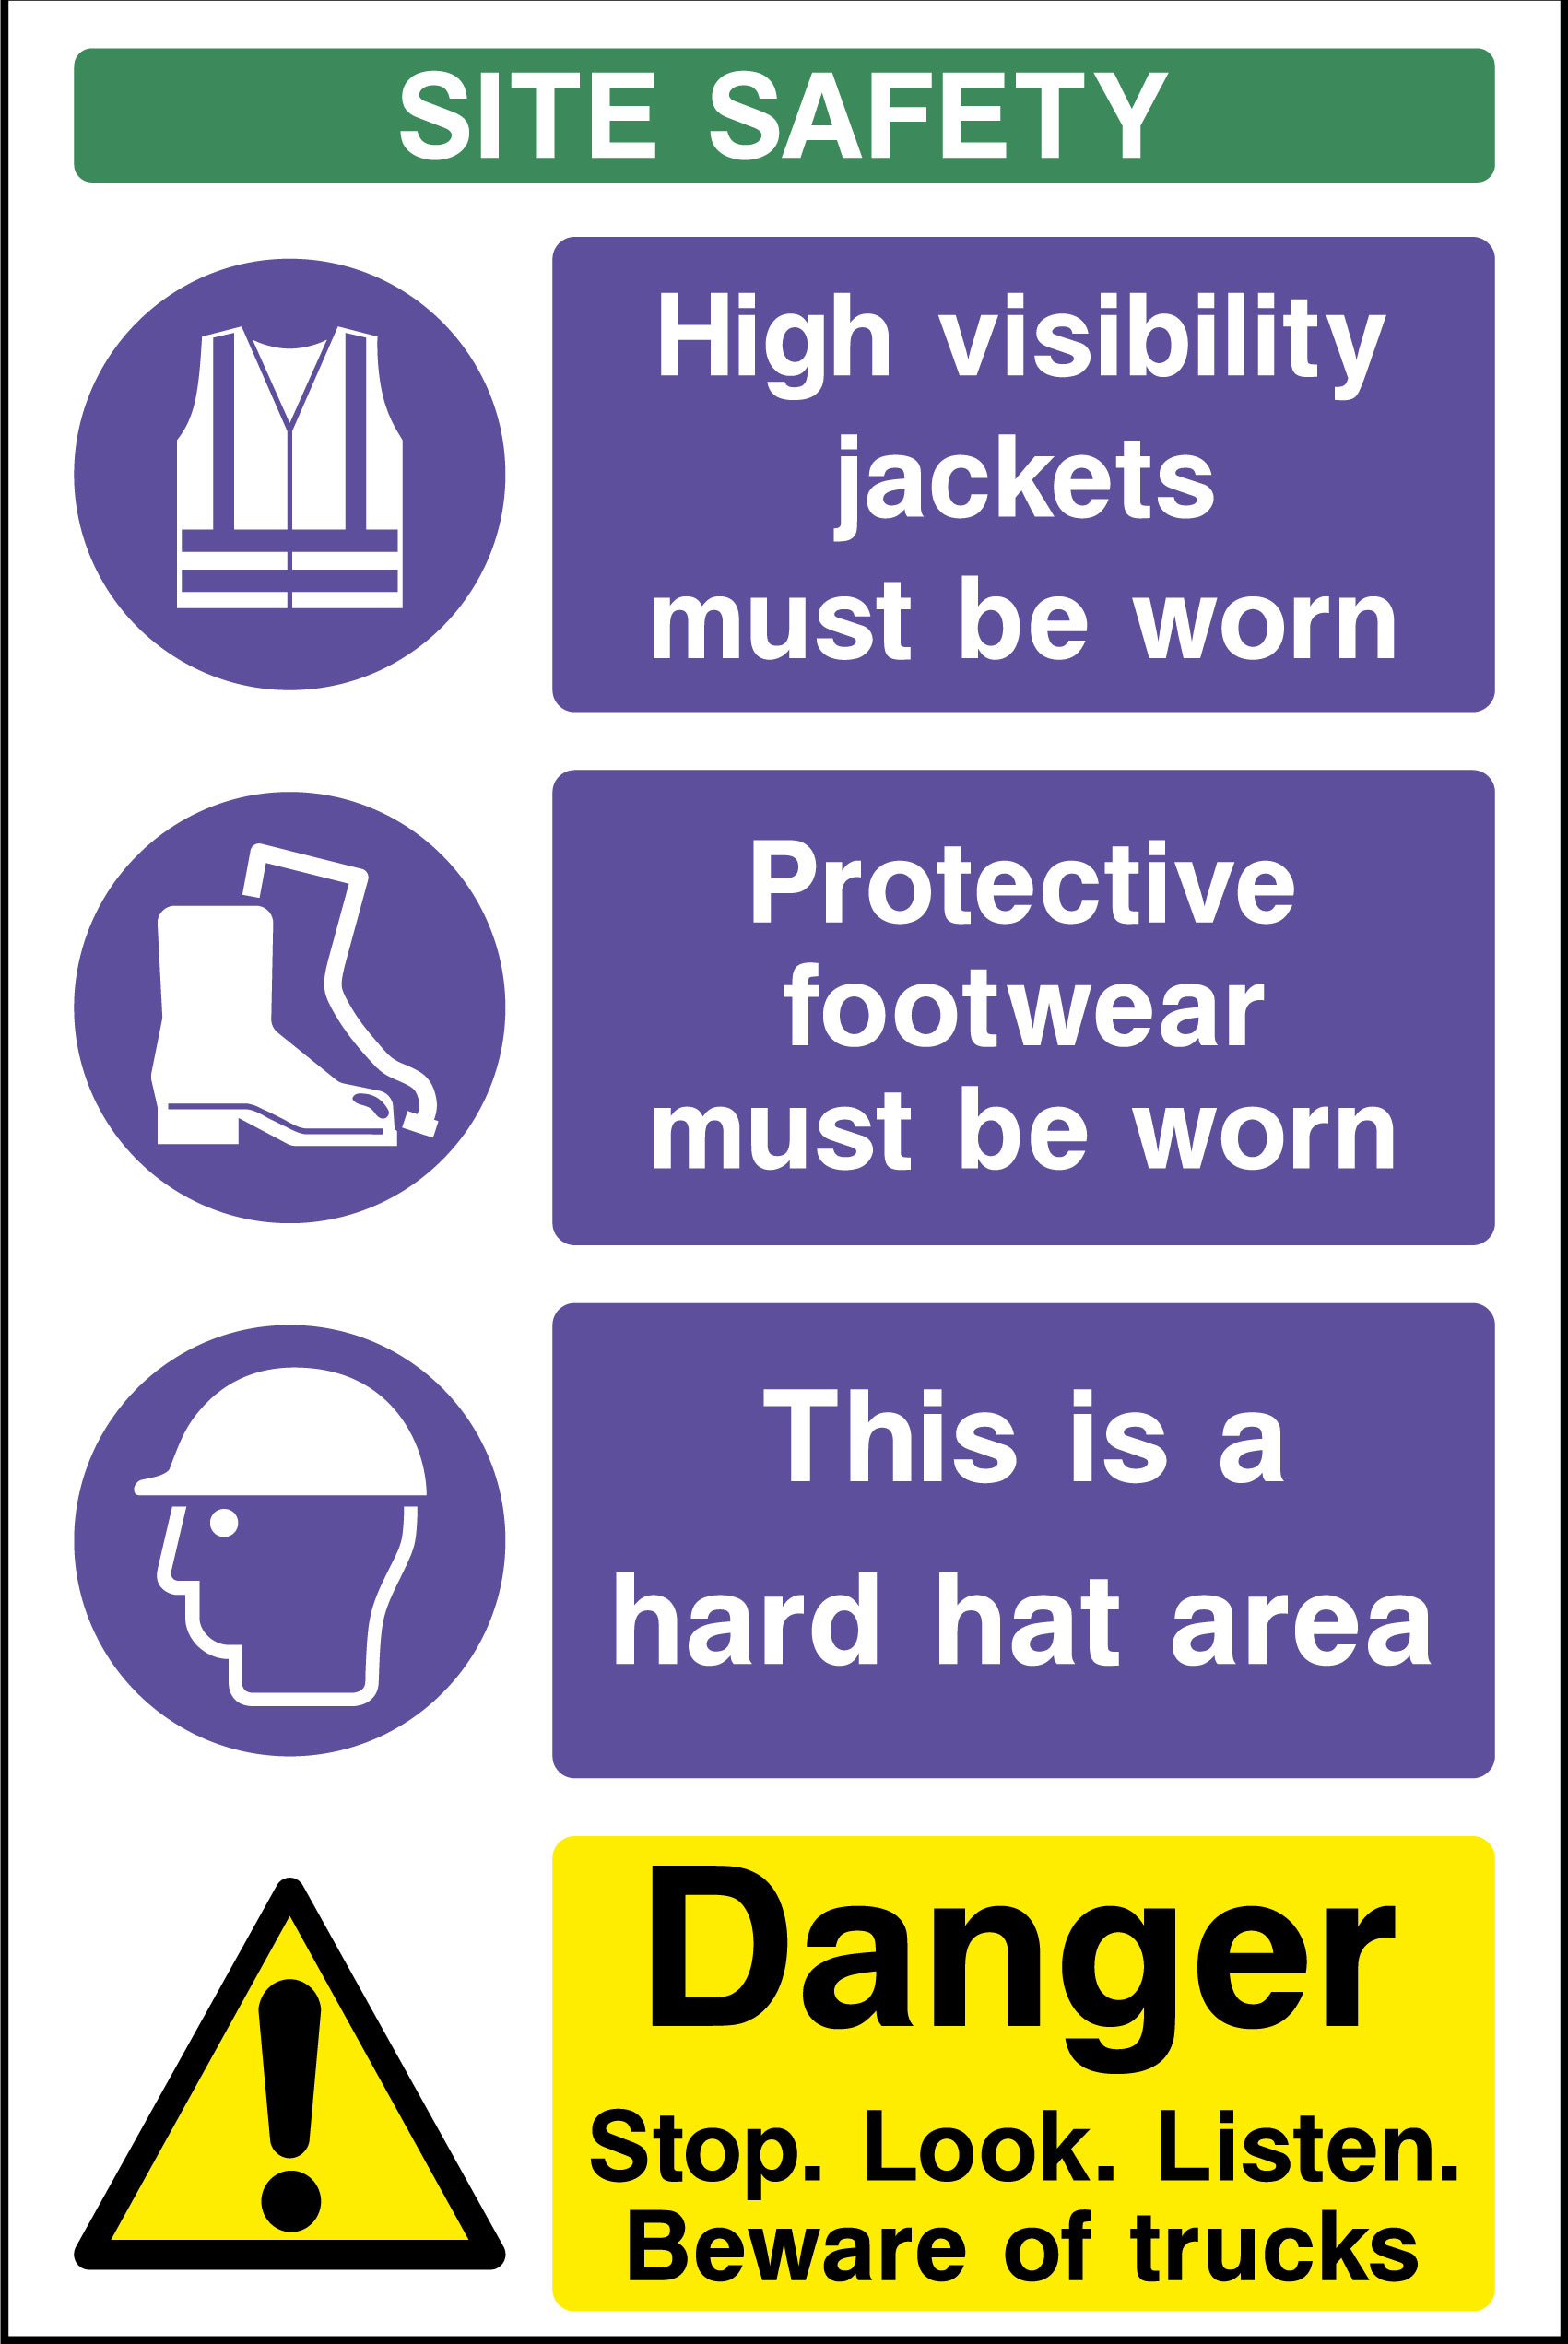 Attention build. Safety signs. Site Safety. Safety перевод. Safety sign for Construction area.